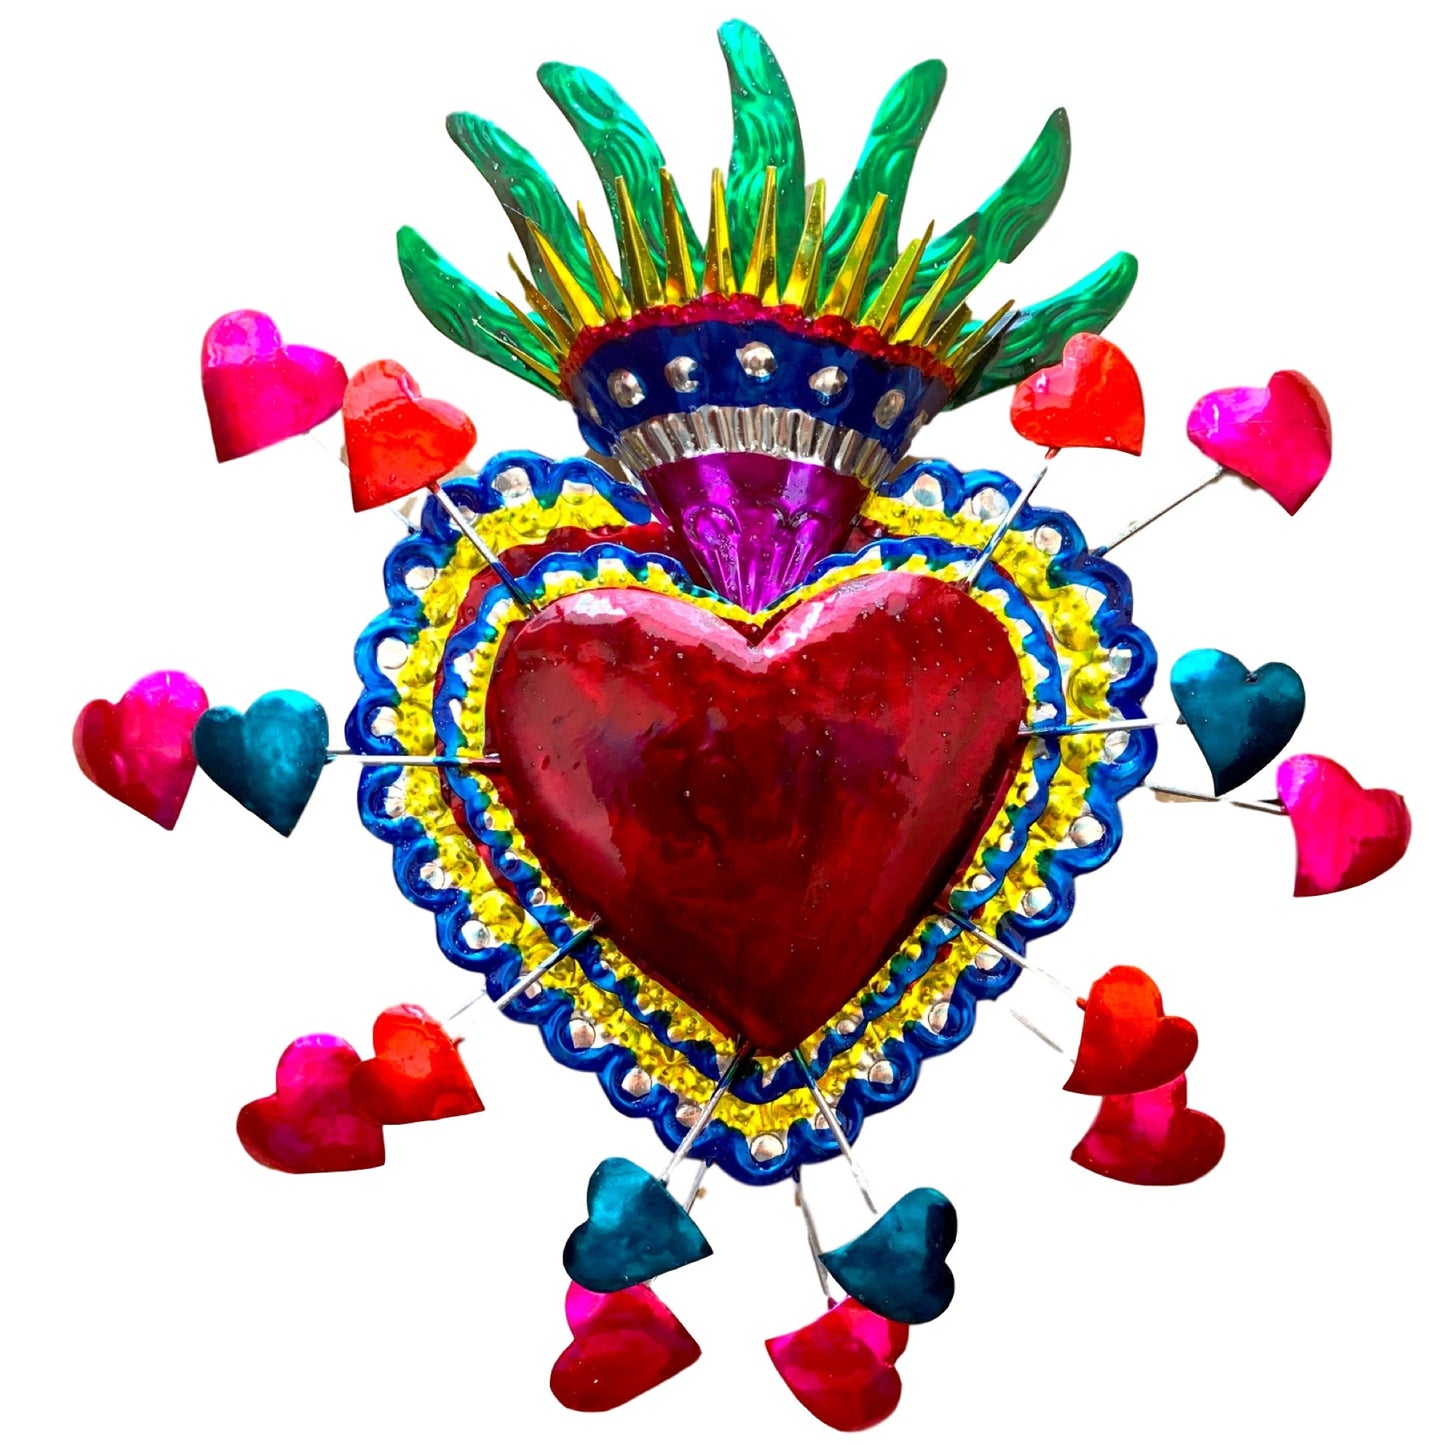 Colorful, hand-painted Embossed Tin Heart Milagro, a symbol of love and luck, easy to hang as vibrant Mexican Folk Art decor.